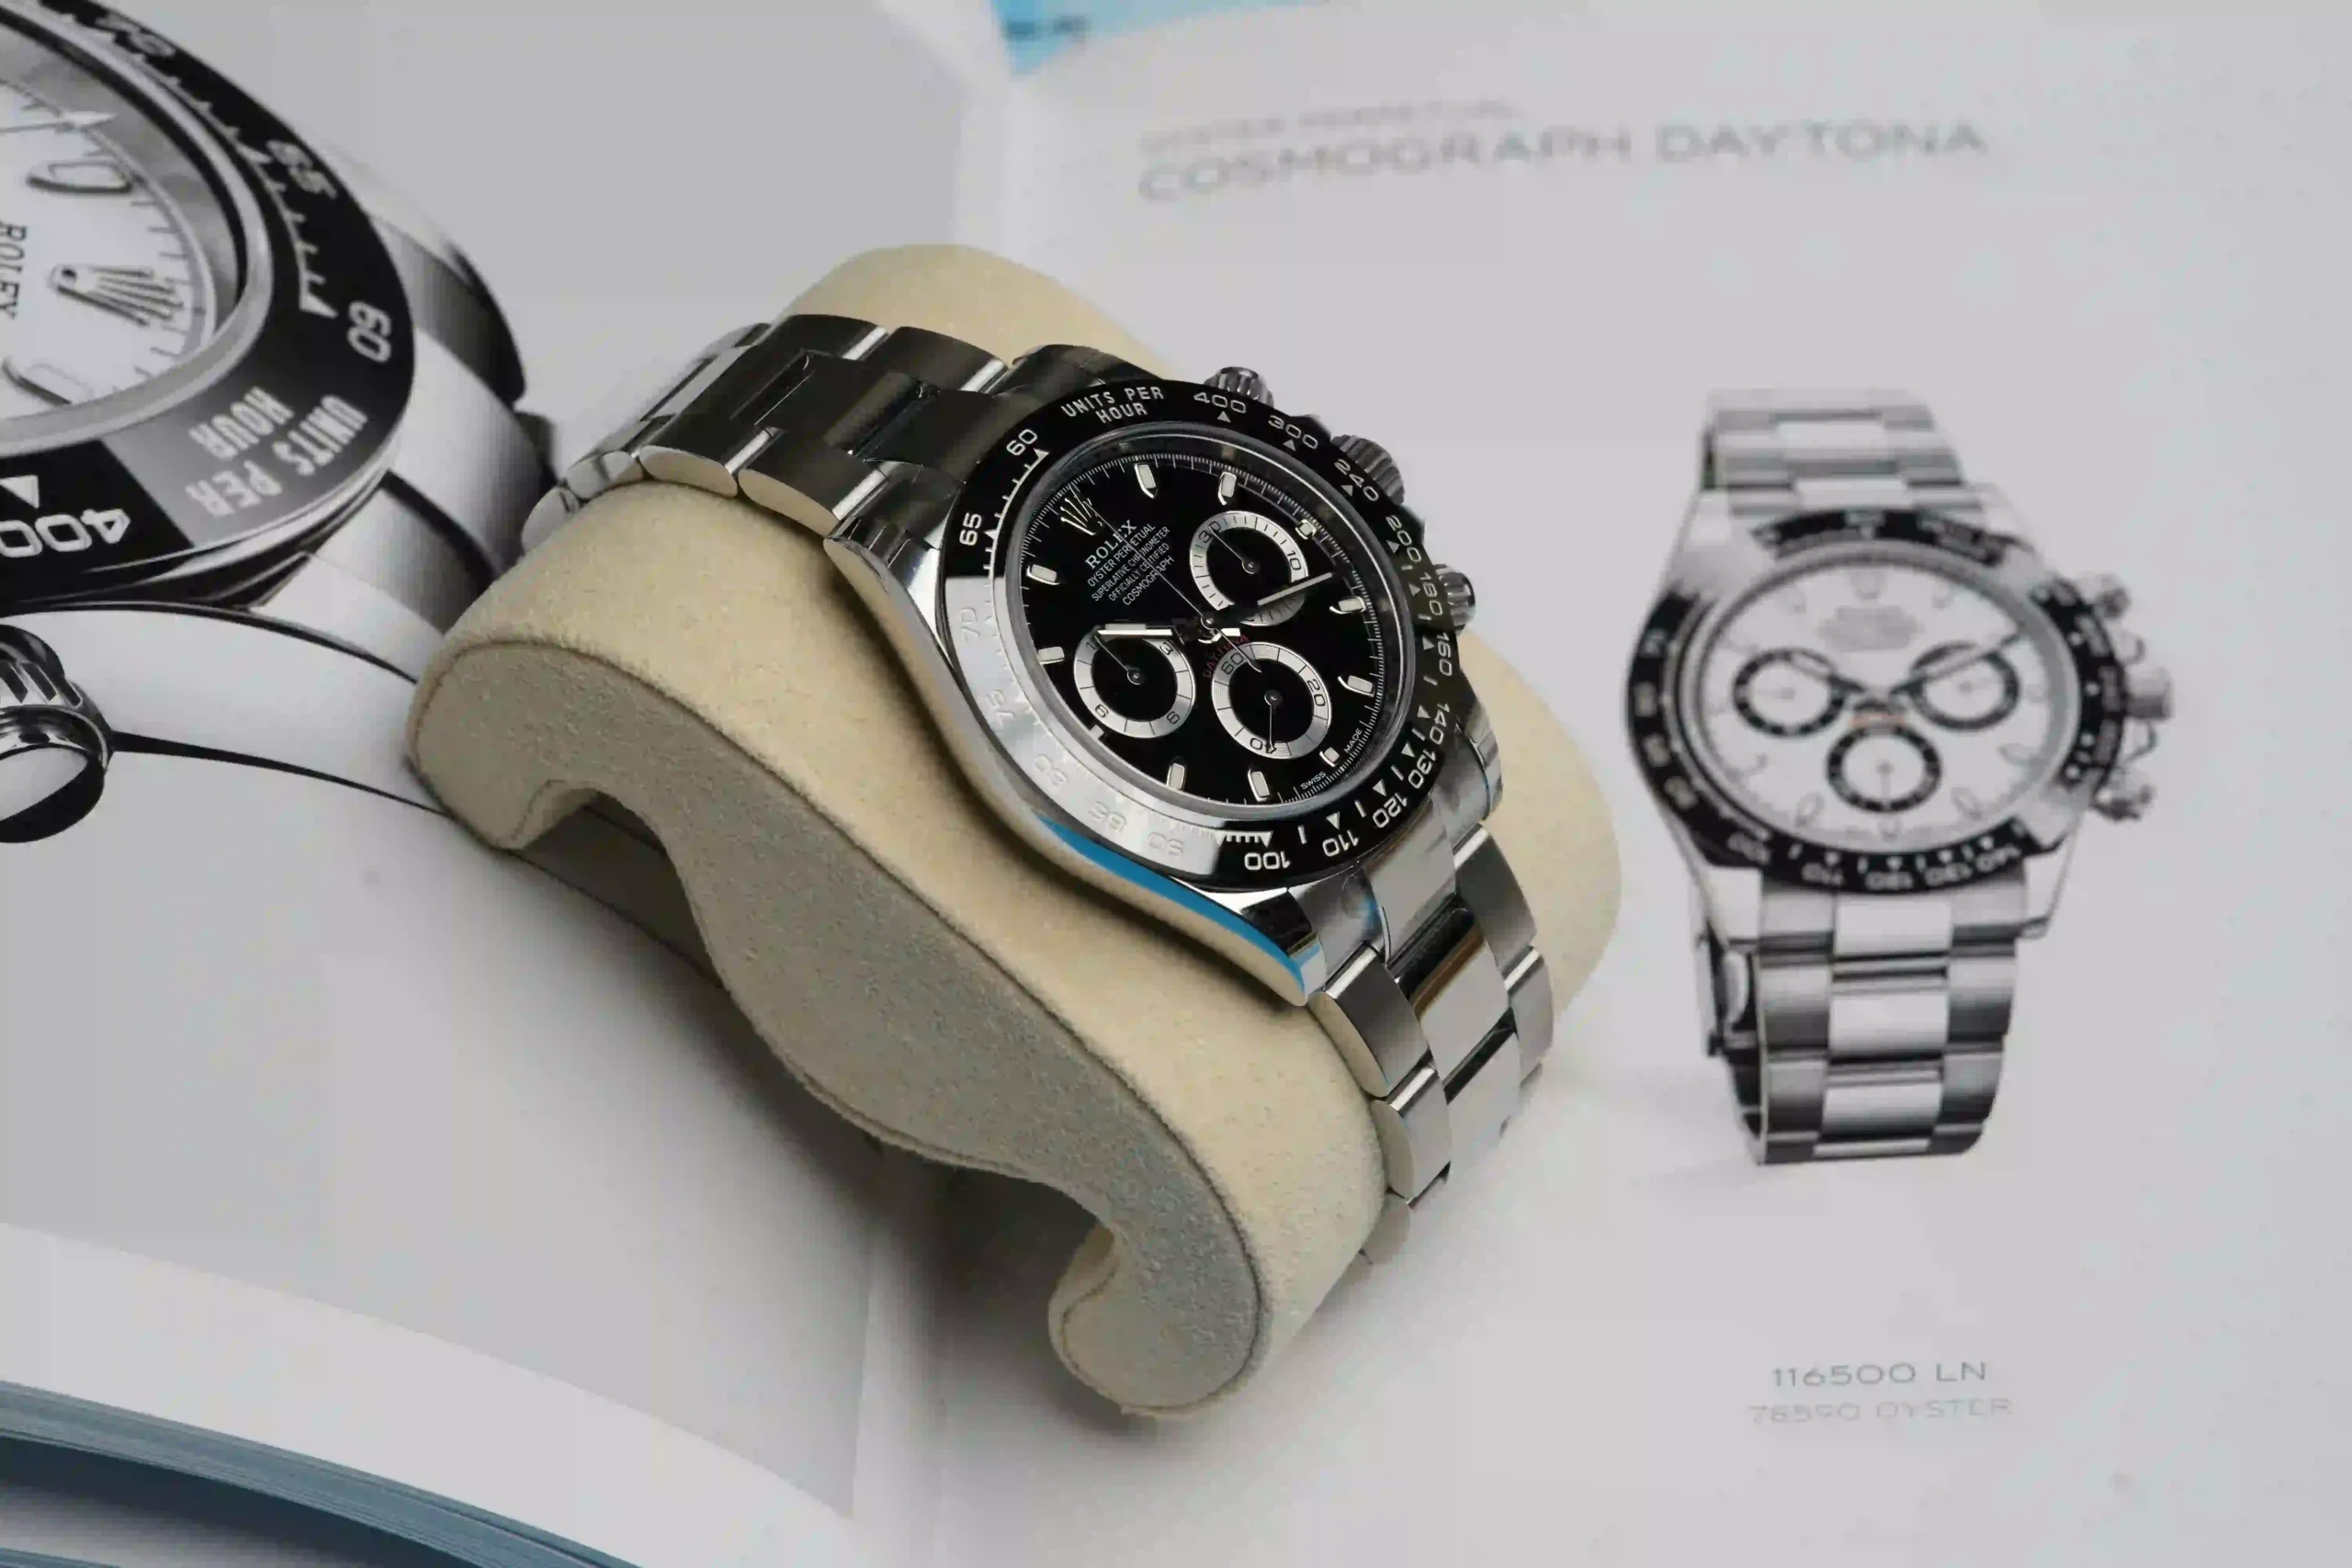 the Best Place to Buy Used Rolex Watches Online